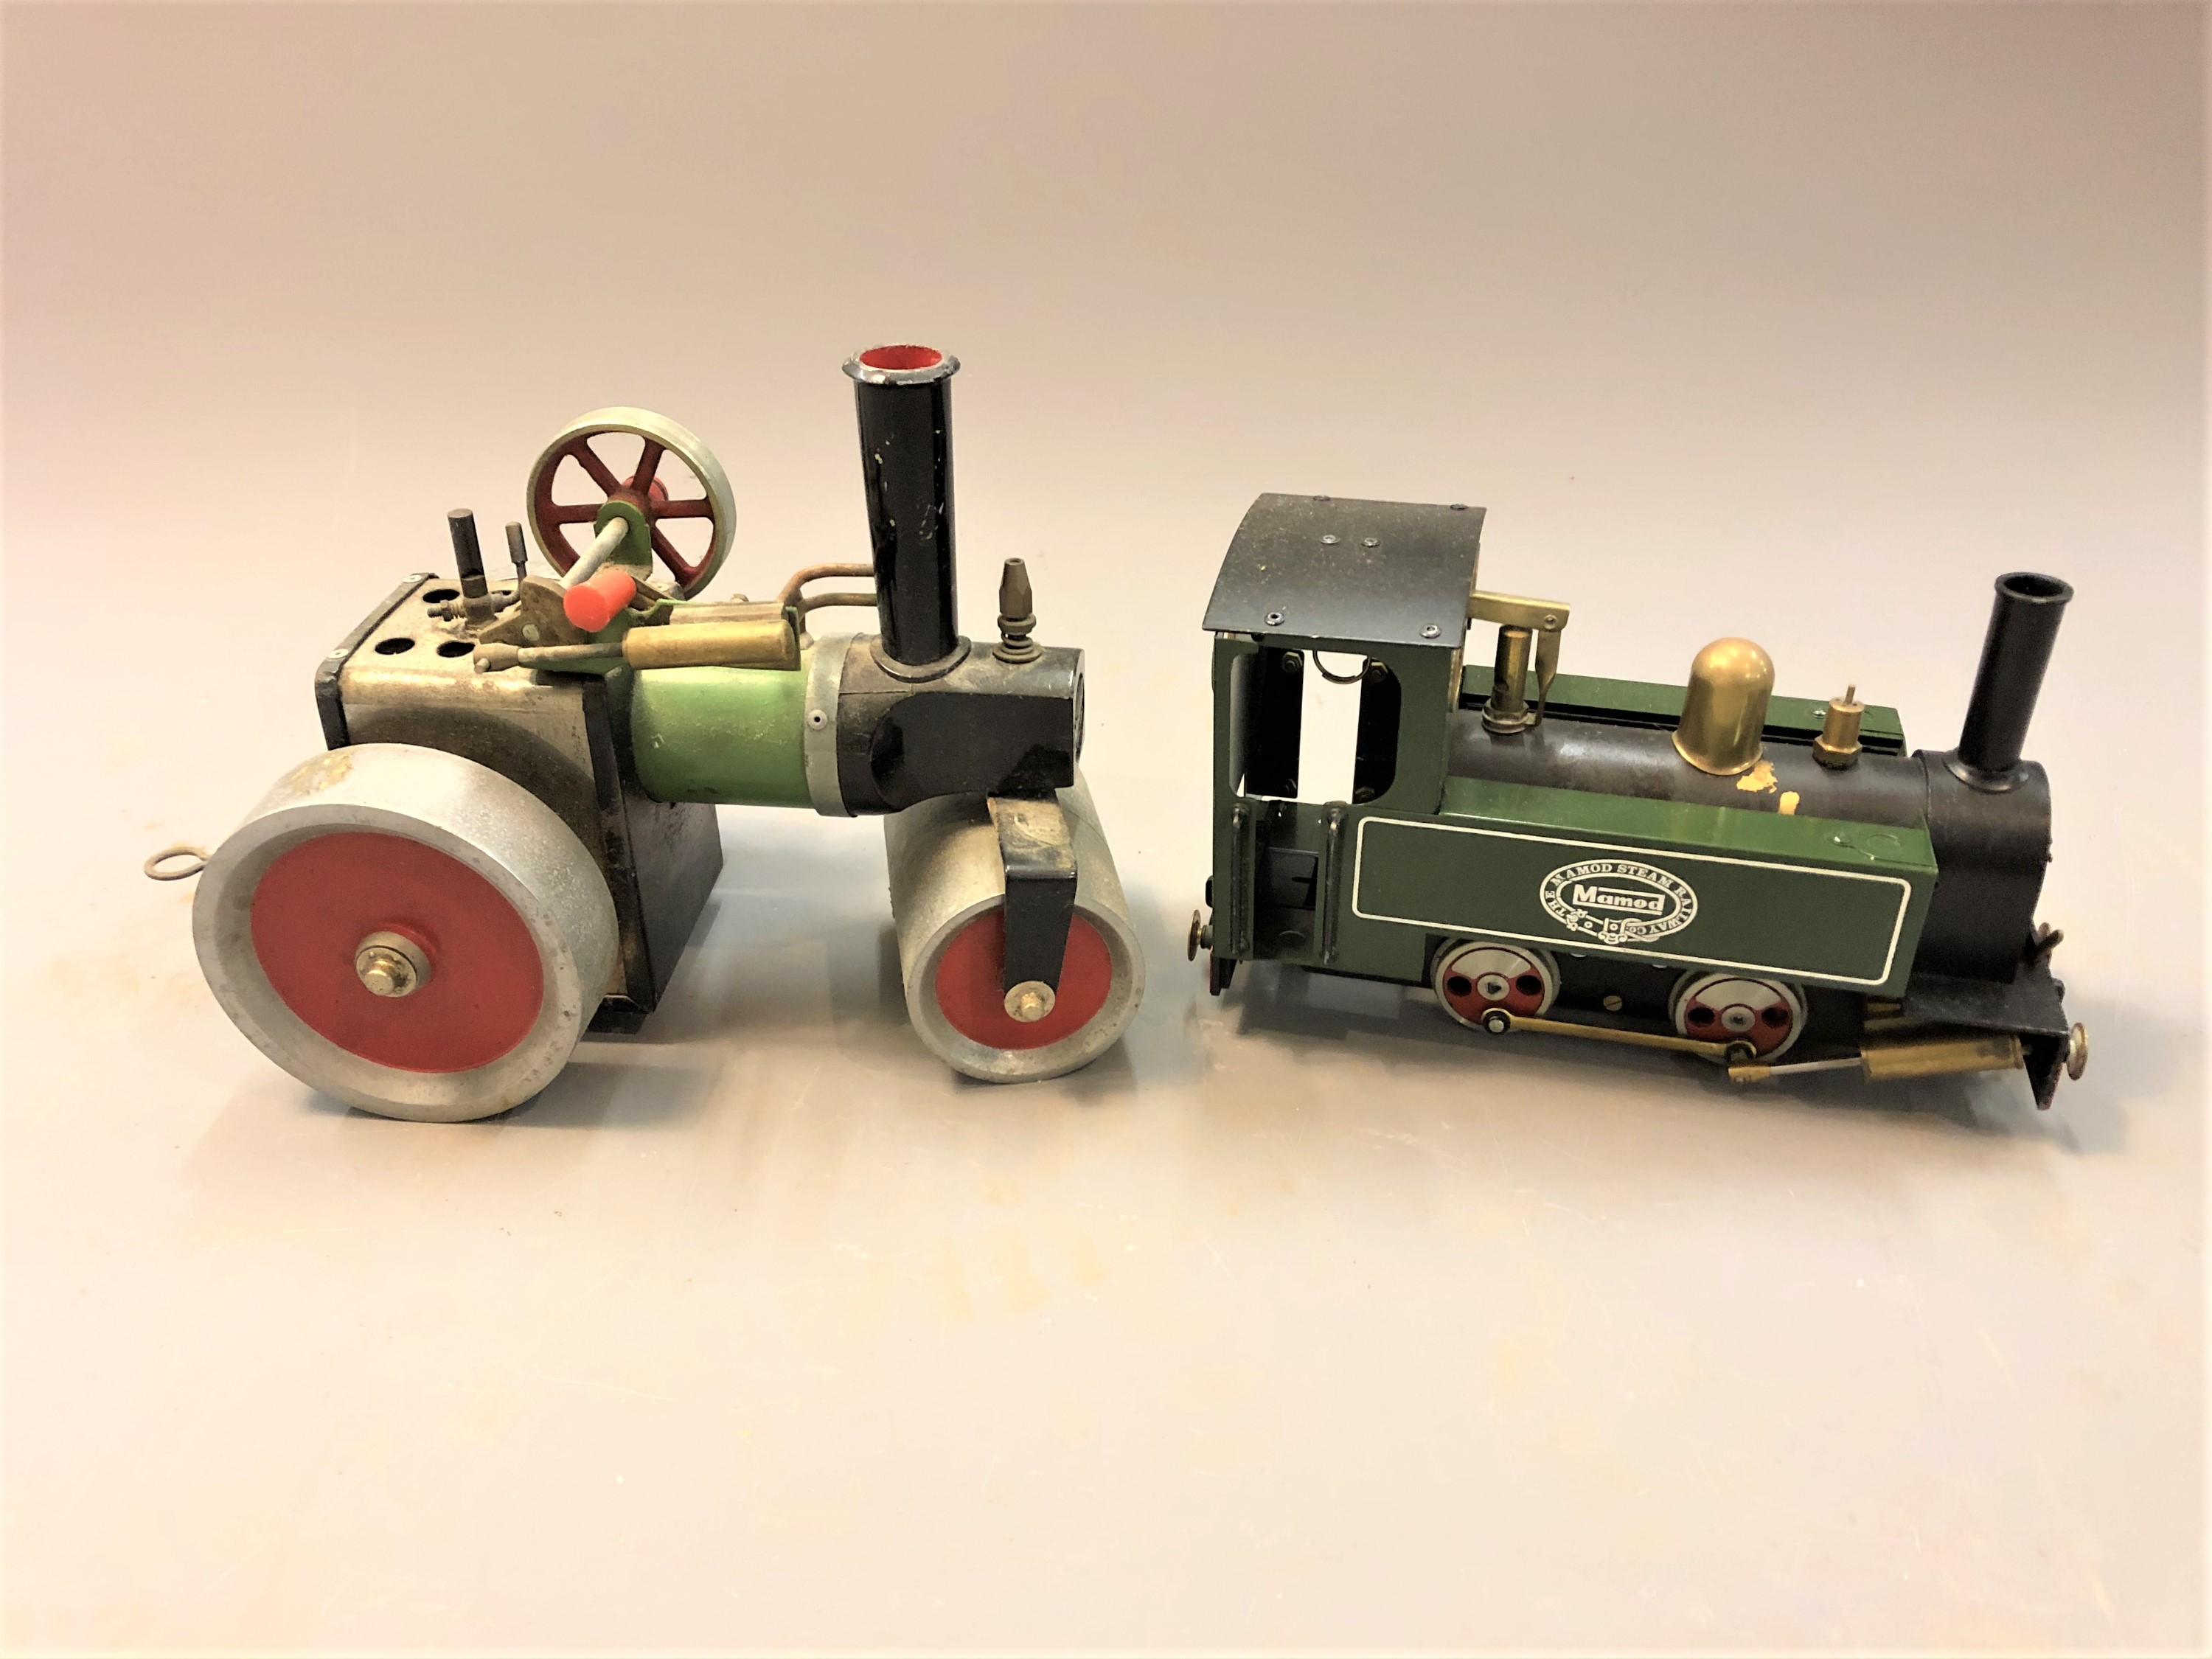 A Mamod steam roller and a locomotive.